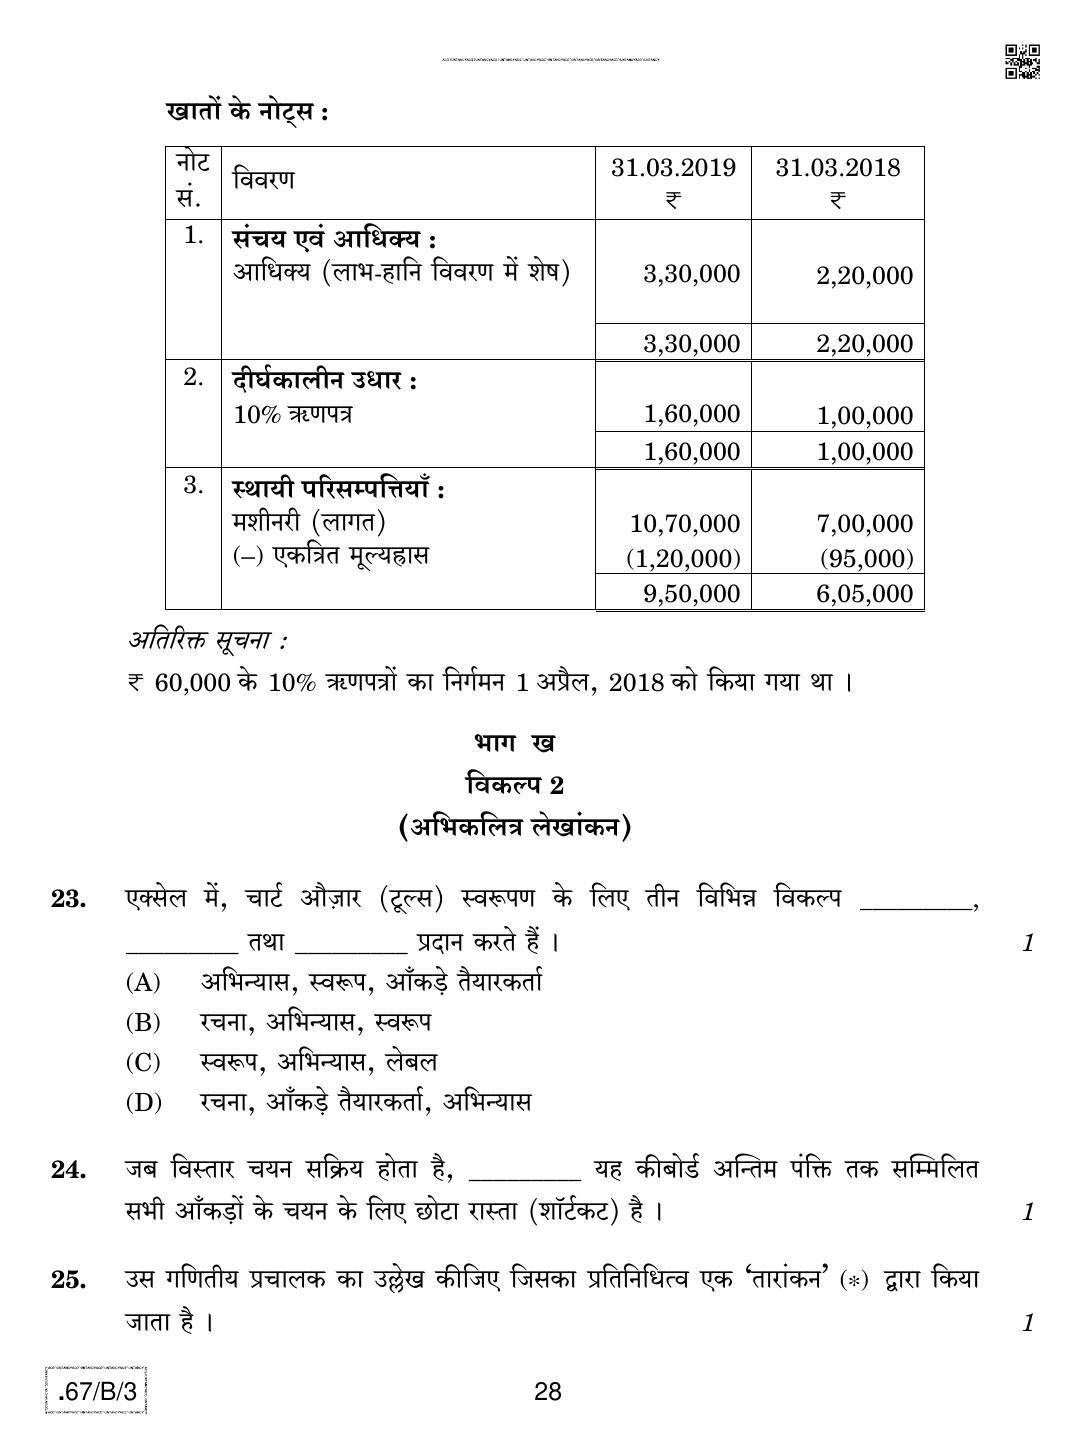 CBSE Class 12 67-C-3 - Accountancy 2020 Compartment Question Paper - Page 28